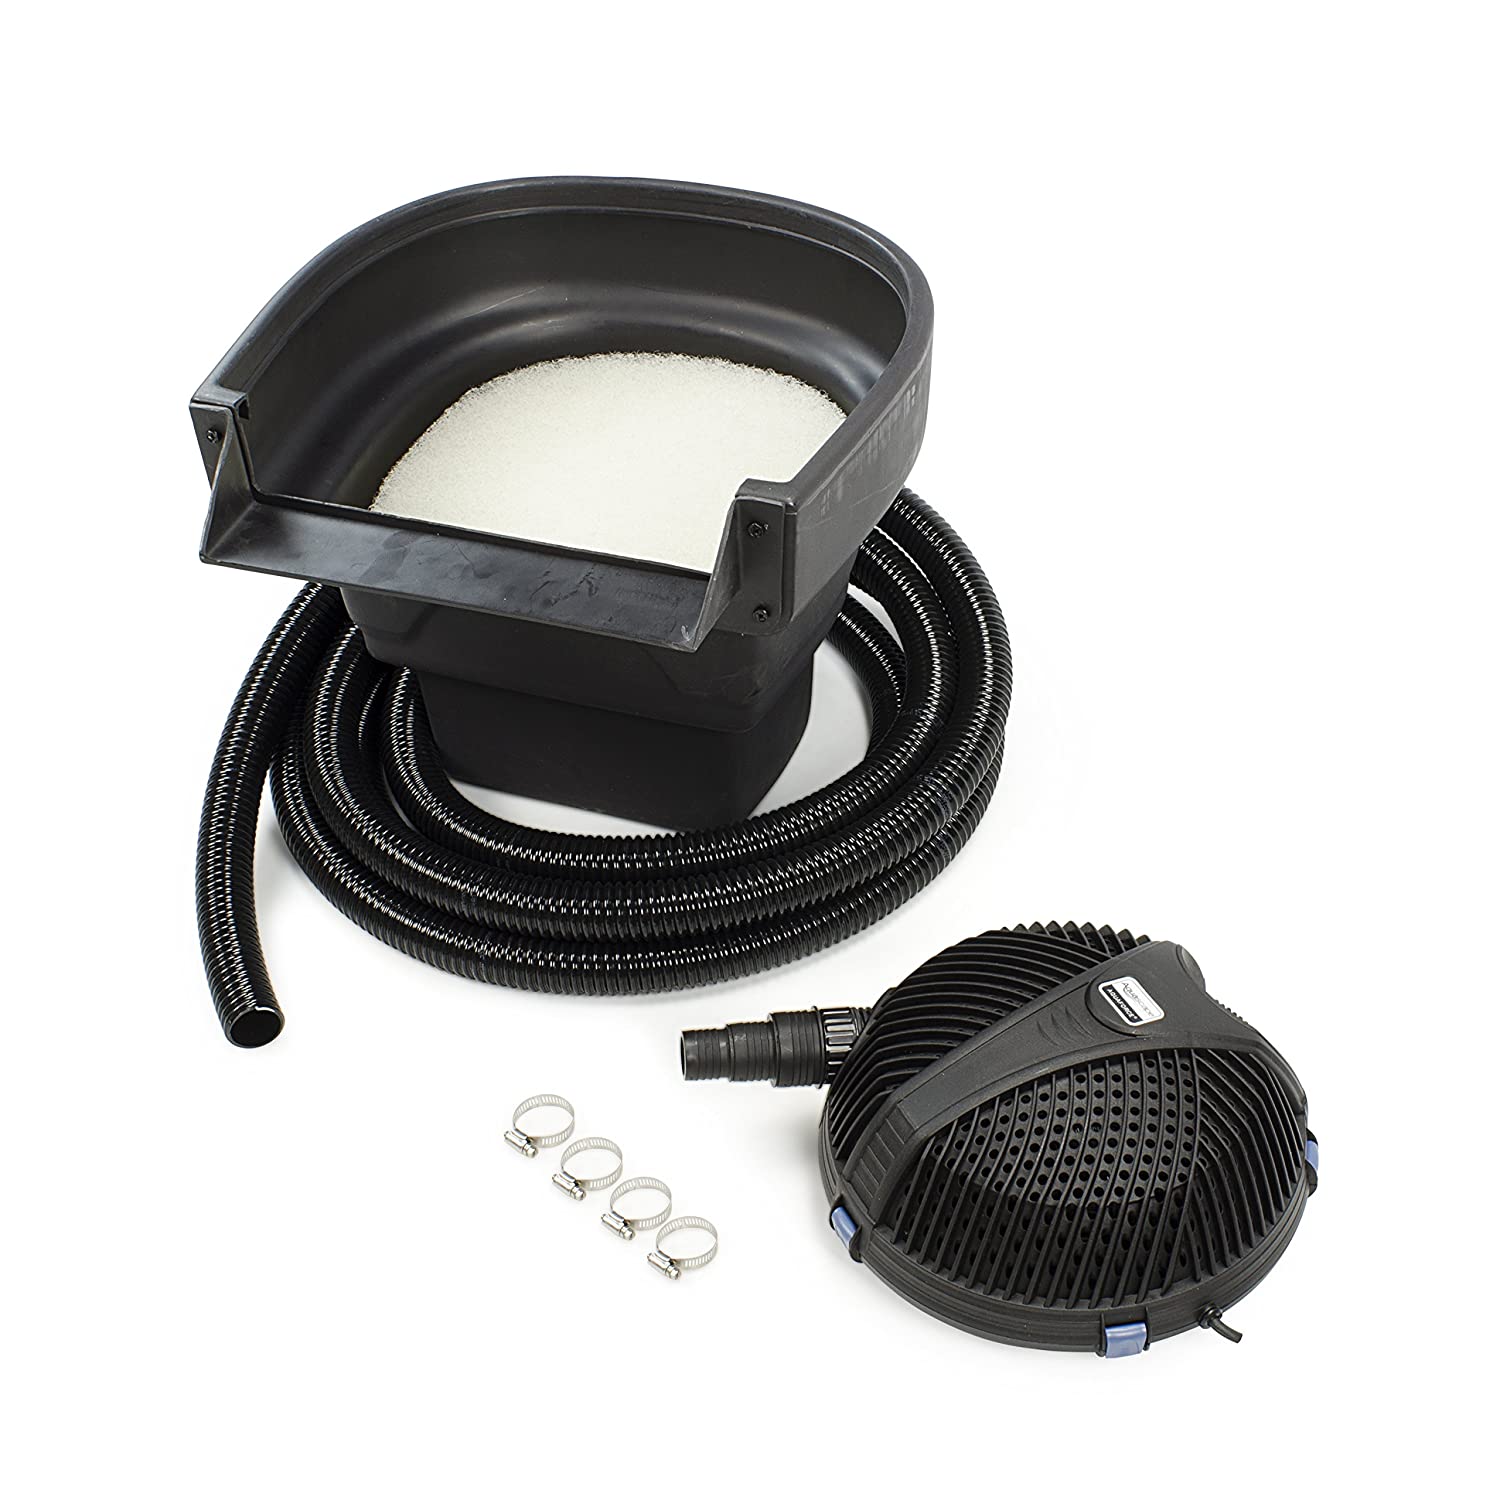 Aquascape 77014 UltraKlean 1000 Filtration Kit for Pond and Water Features